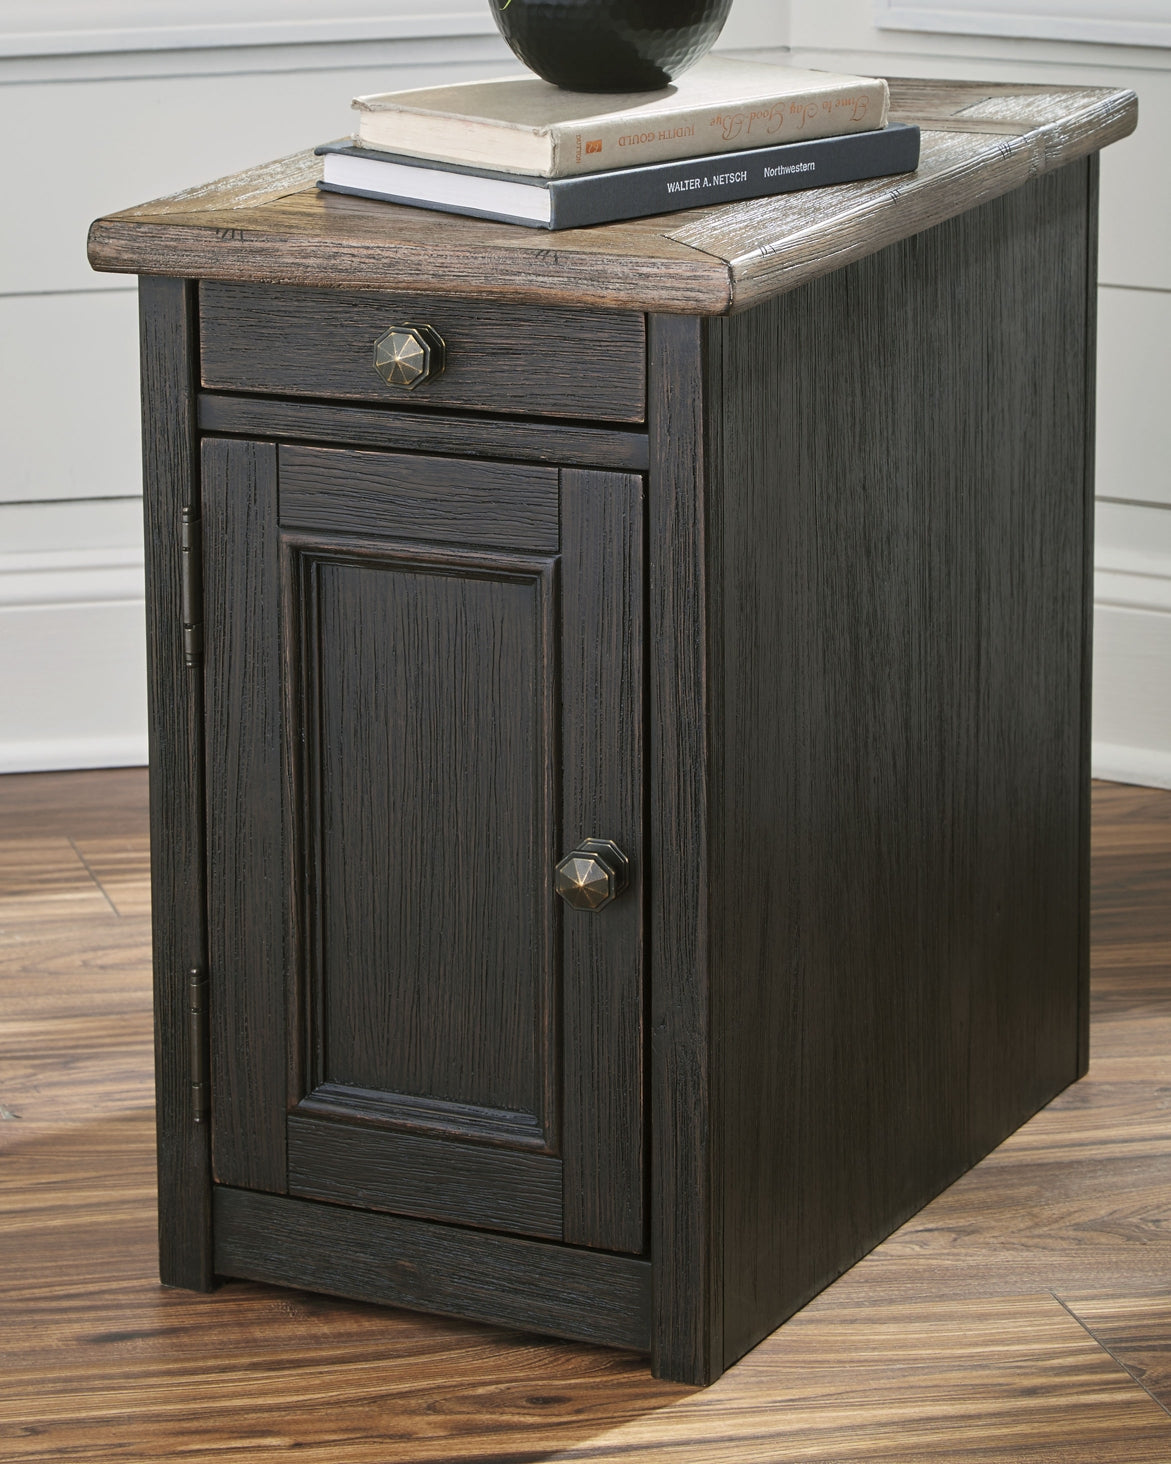 Tyler Creek 2 End Tables JB's Furniture  Home Furniture, Home Decor, Furniture Store